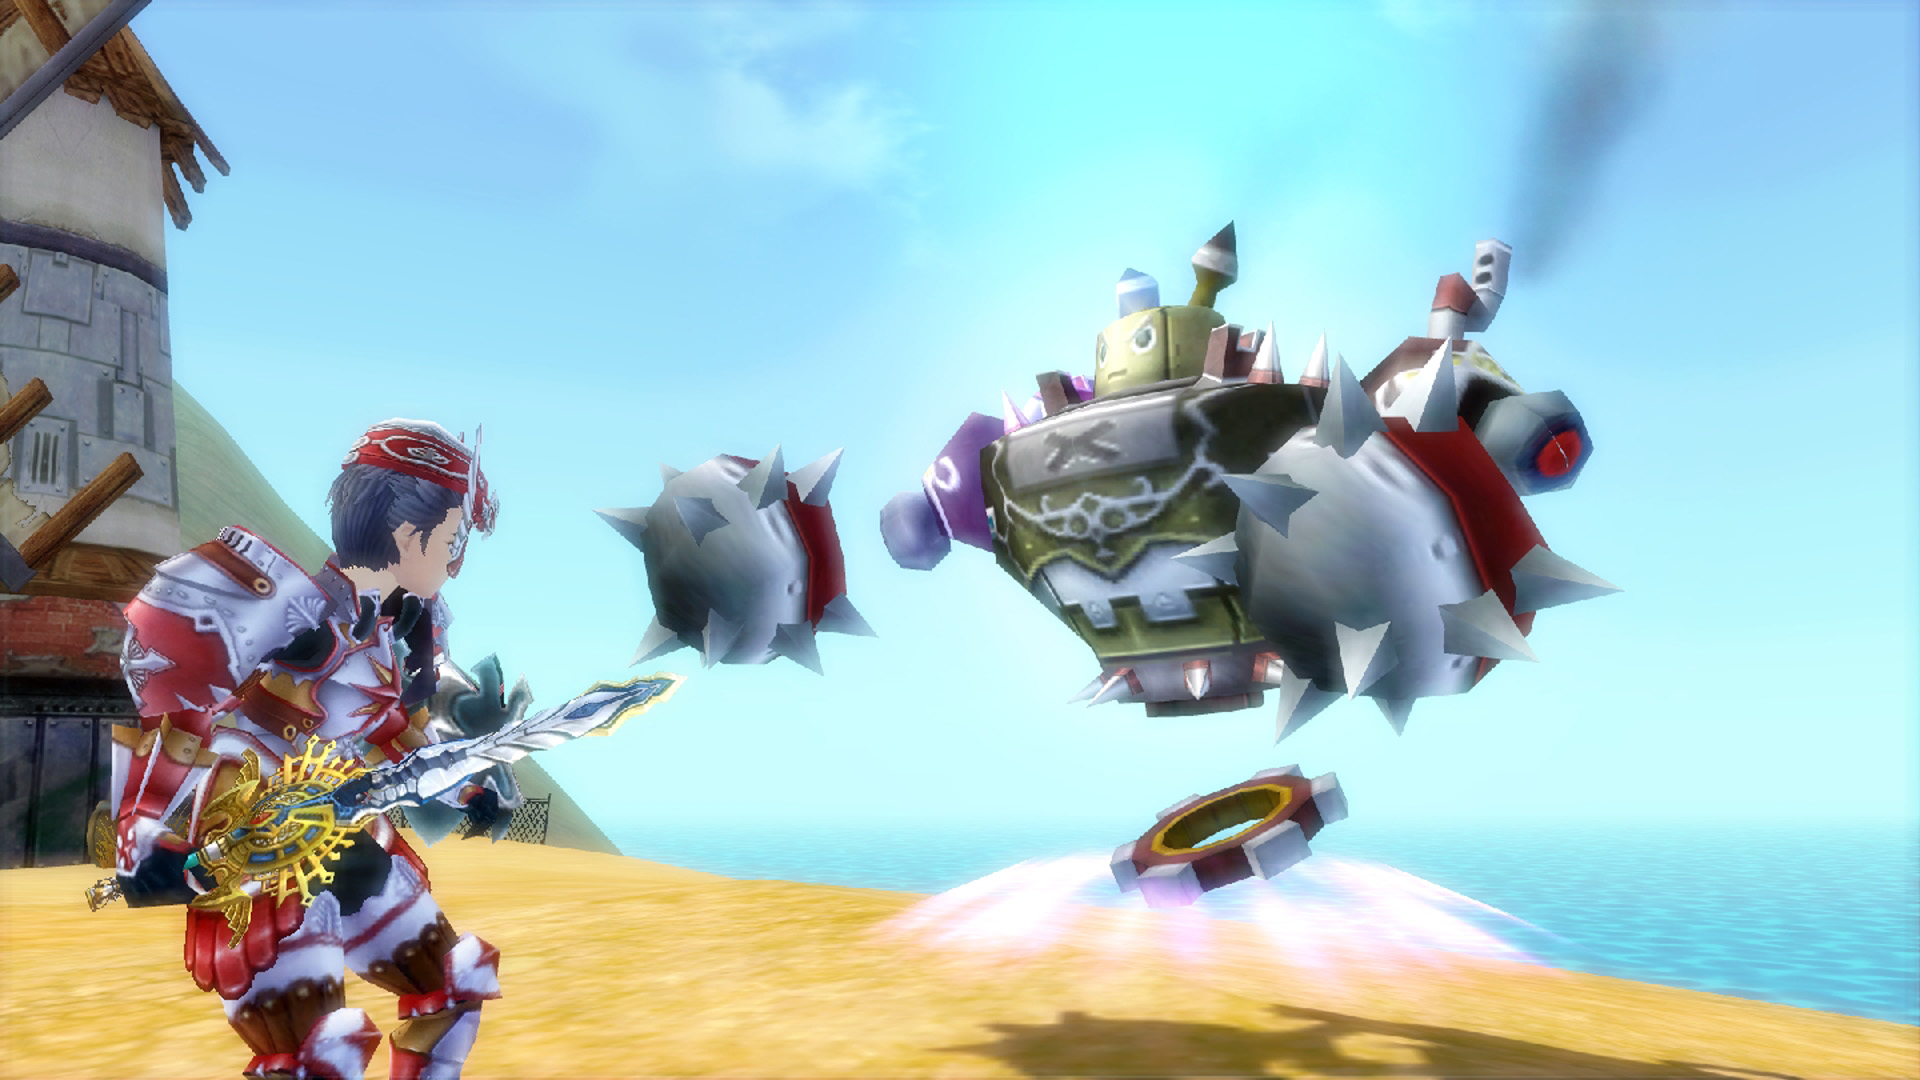 Lucent Heart Appid 283060 Steamdb Images, Photos, Reviews